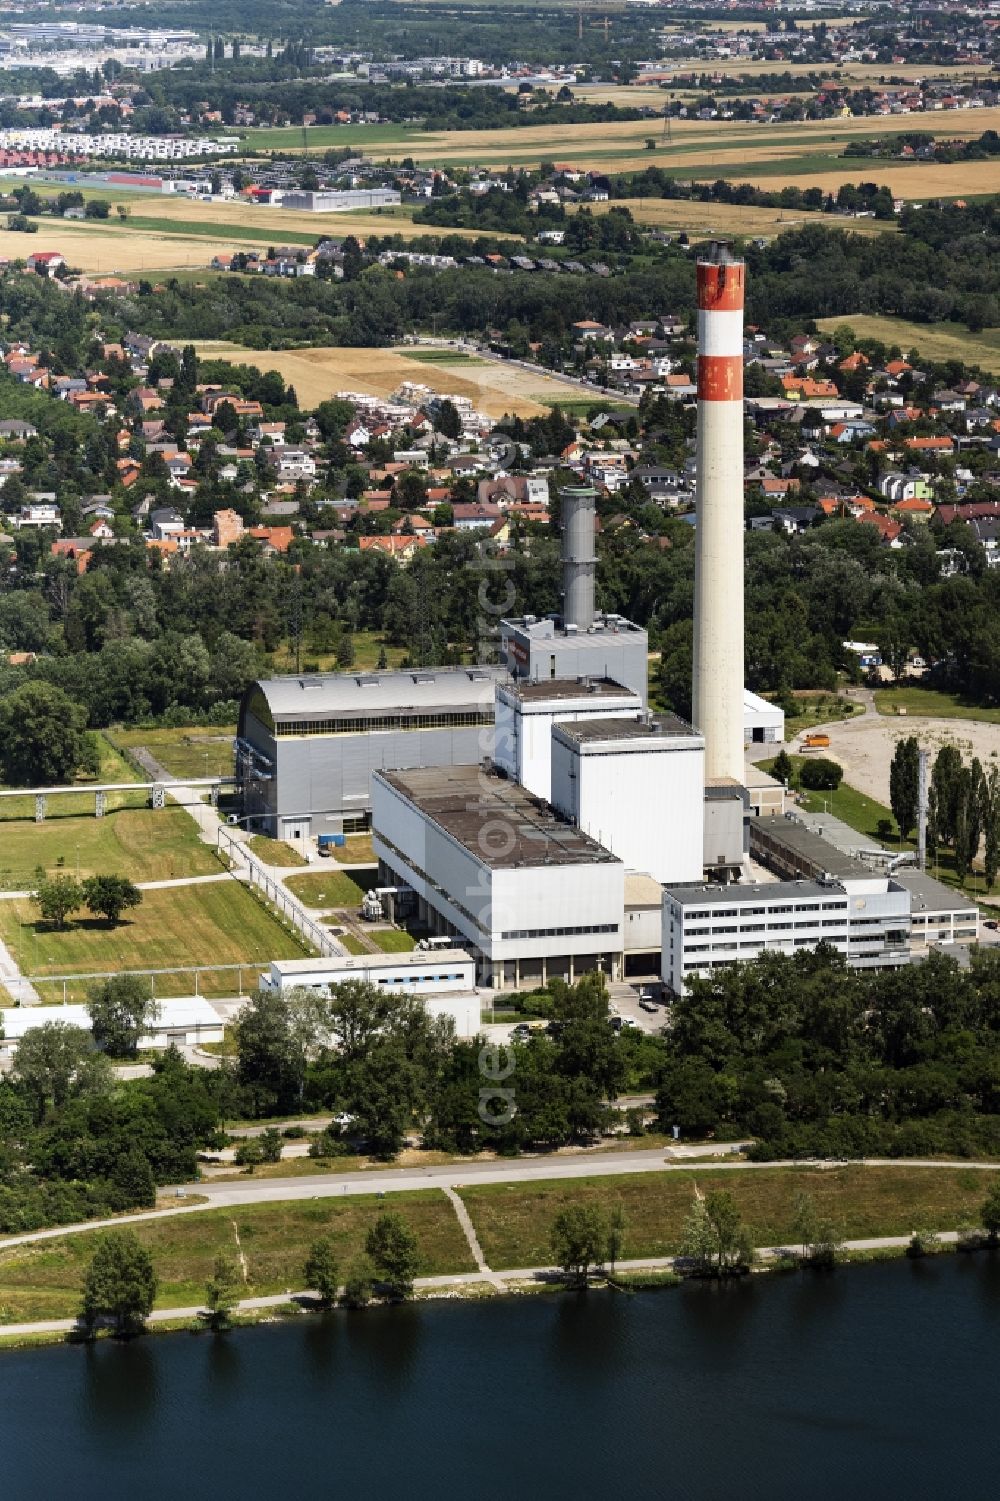 Wien from above - Power plants and exhaust towers of thermal power station KWK-Kraftwek Donaustadt in Vienna in Austria